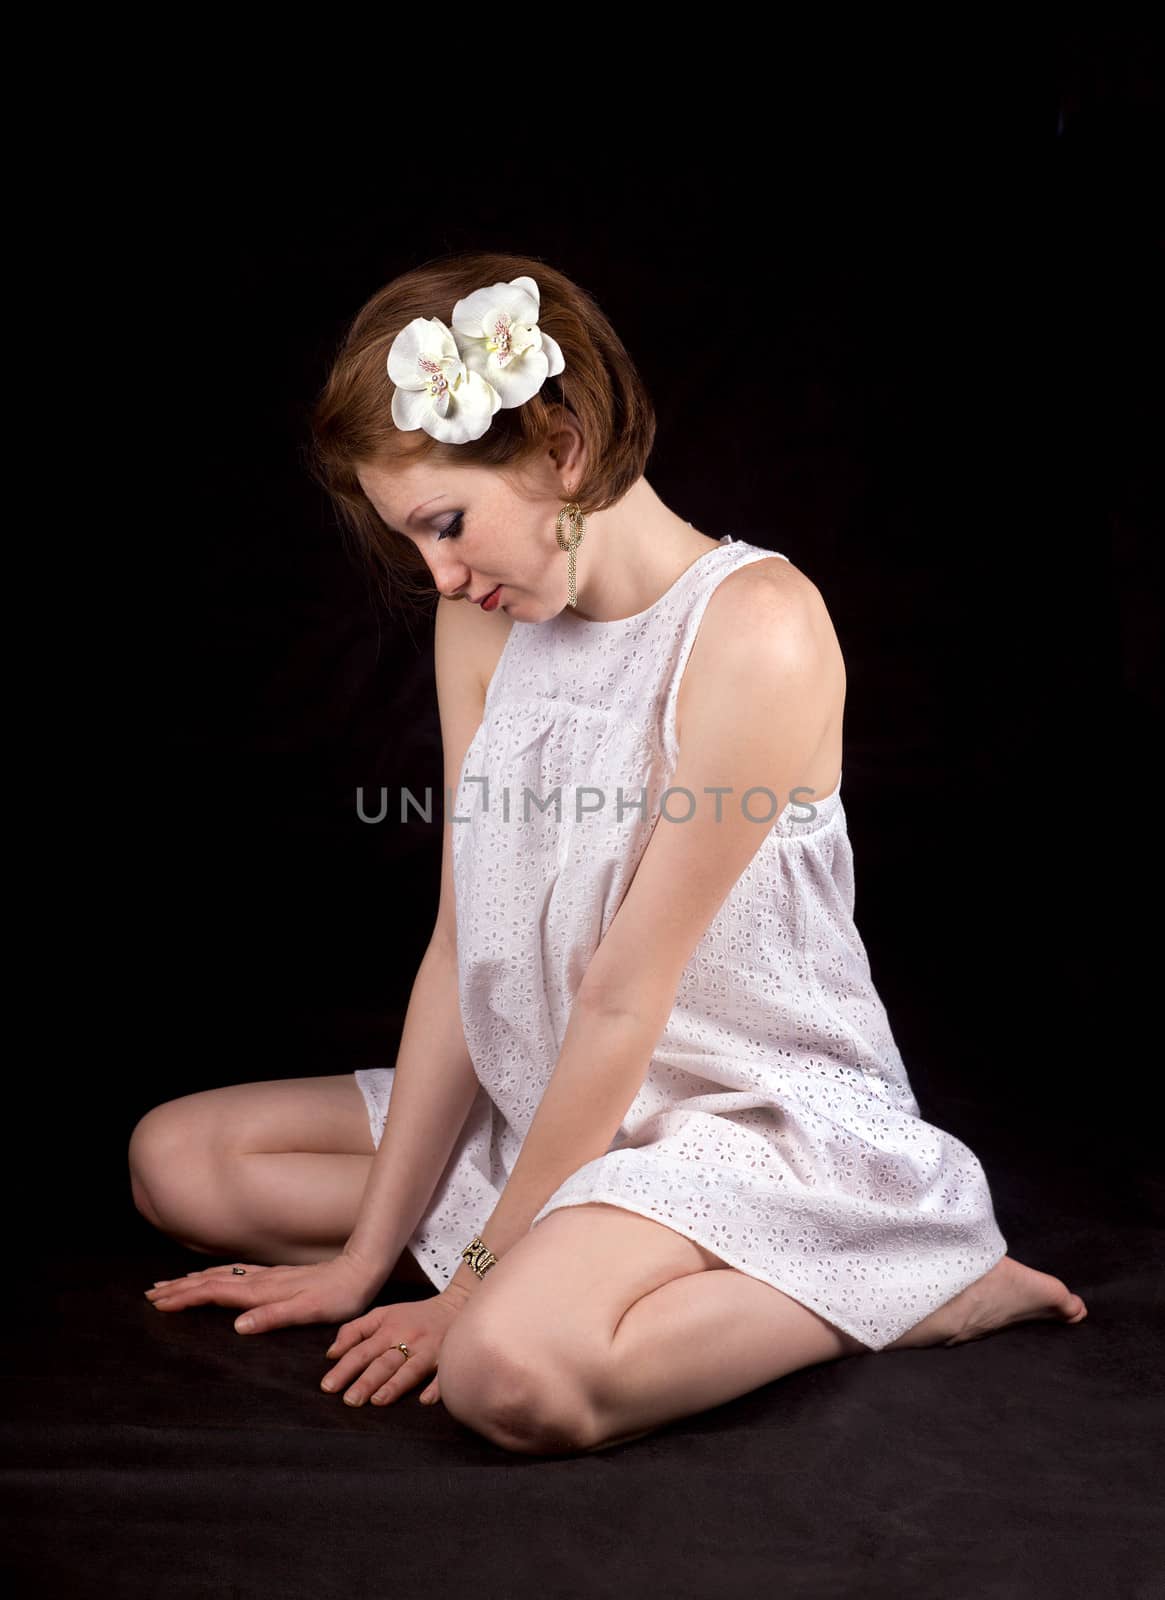 Red-haired girl with ornaments in white dress on a black background